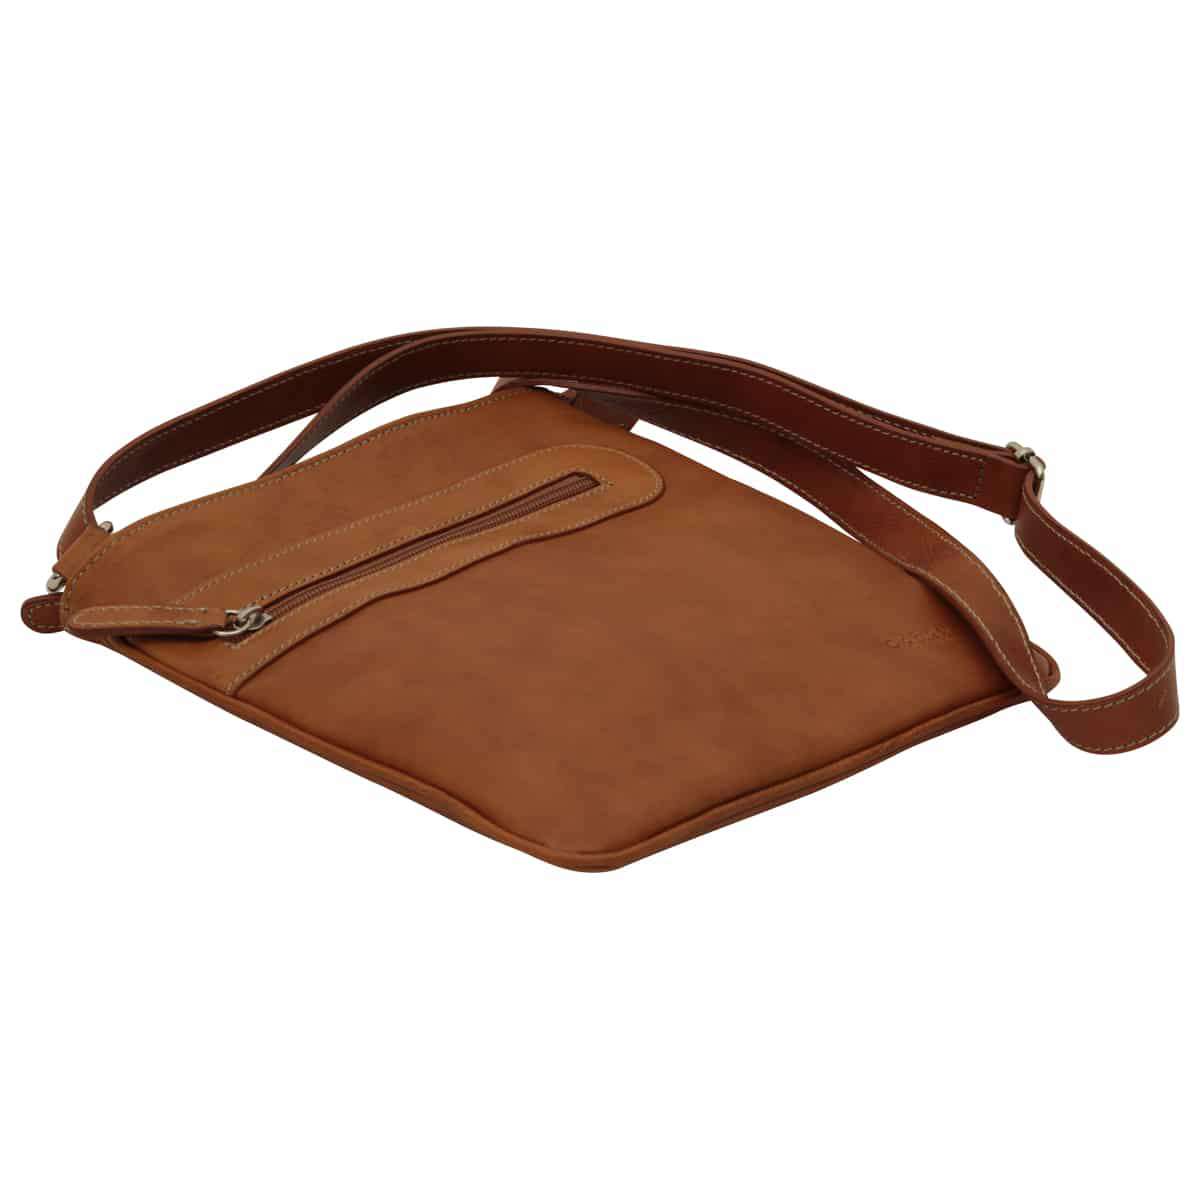 Leather cross body bag with zip pocket - Brown Colonial | 086161CO US | Old Angler Firenze